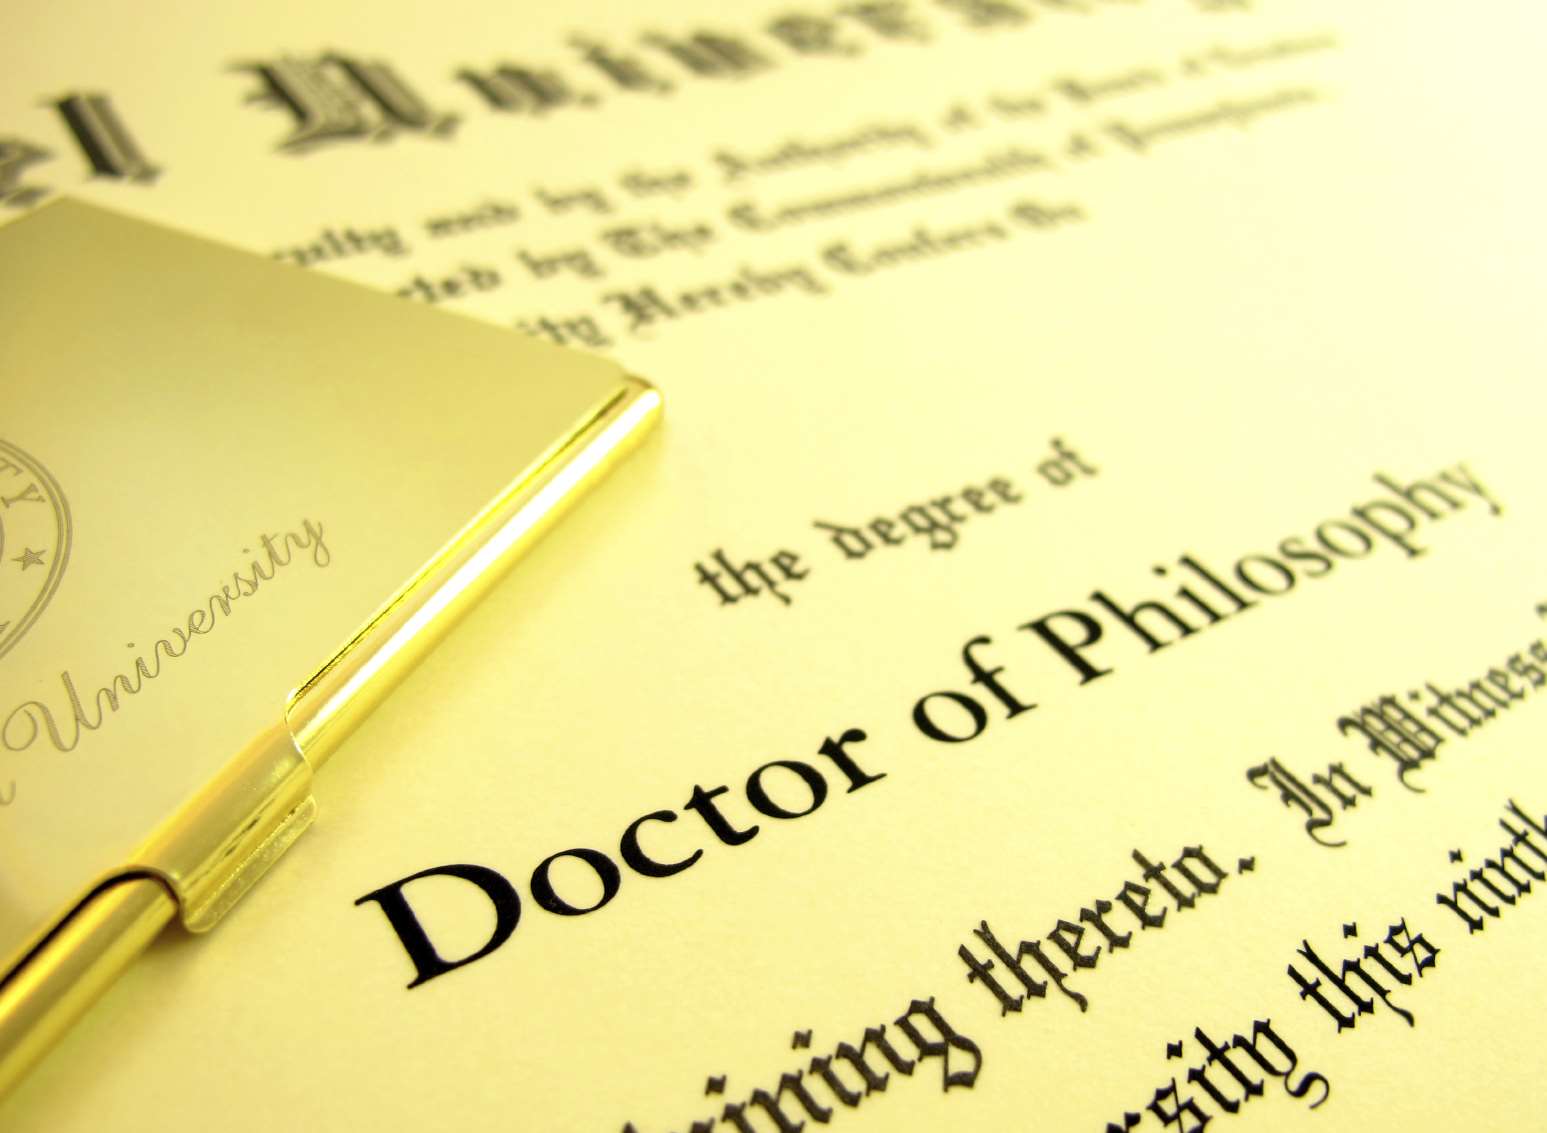 Sims claimed she had a Doctor of Philosophy degree. Picture: Stock image